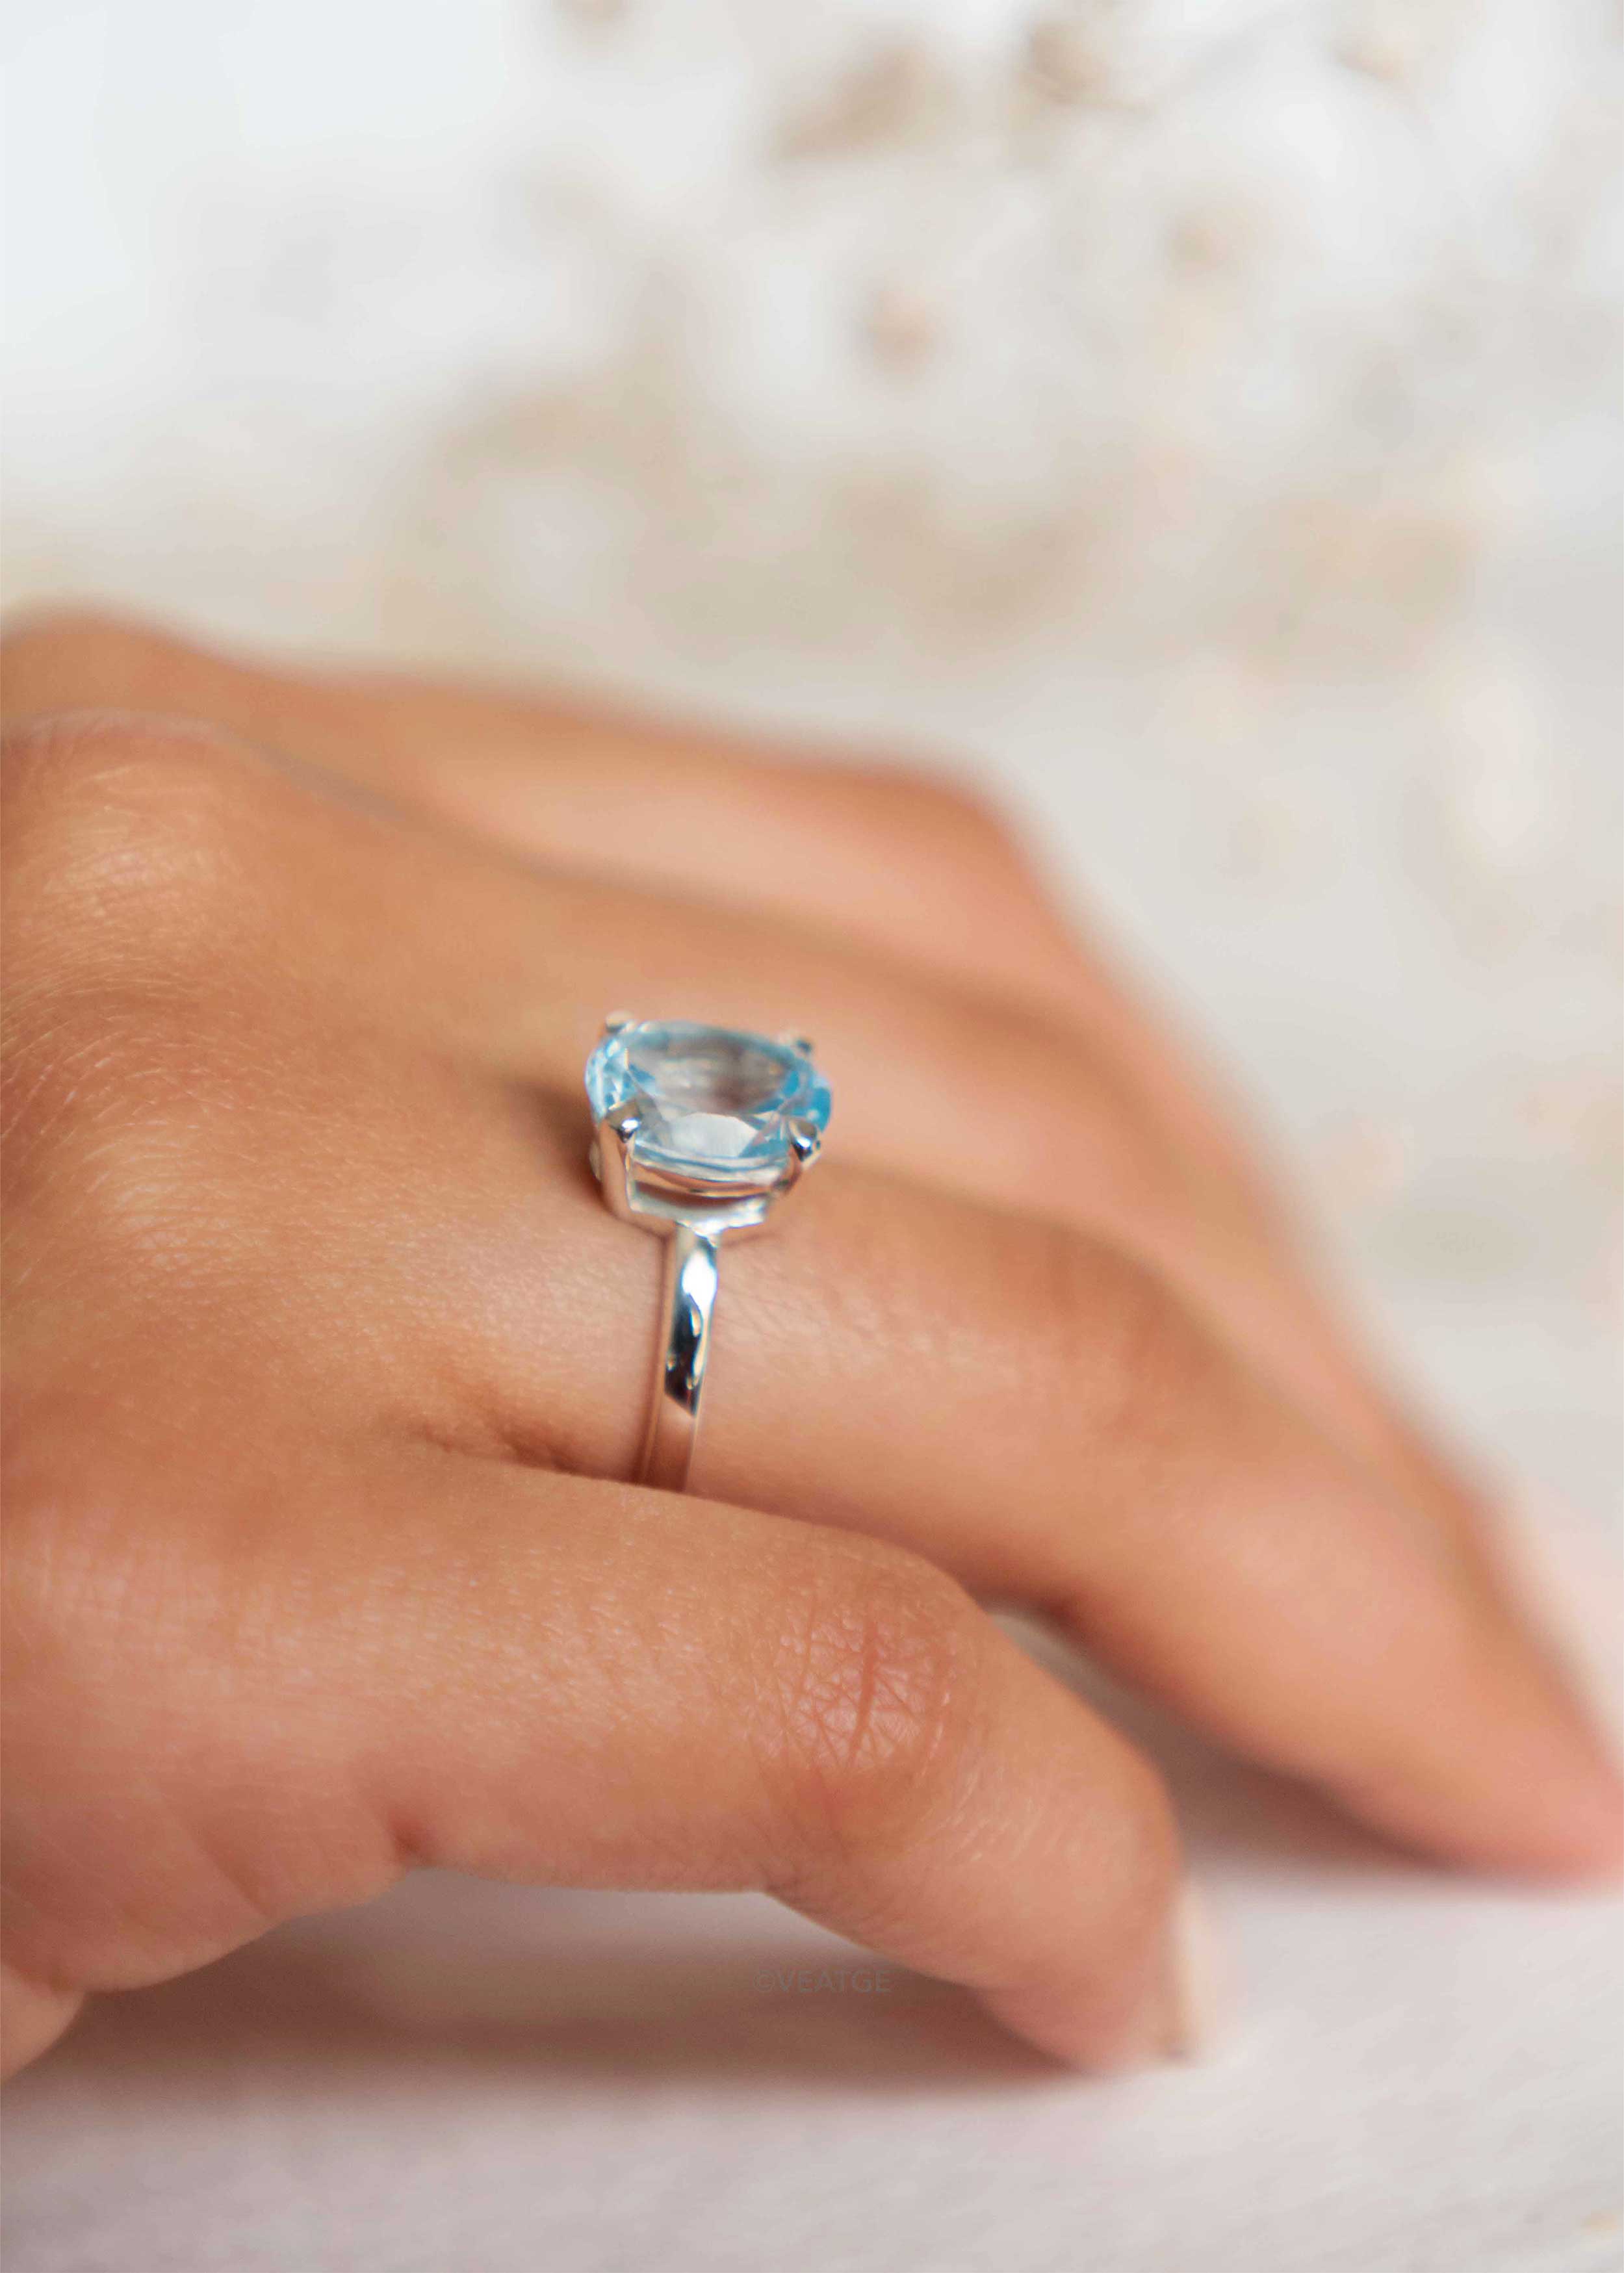 Genuine Blue Topaz Engagement Promise Proposal Ring Sterling Silver Gifts for Women December Birthstone